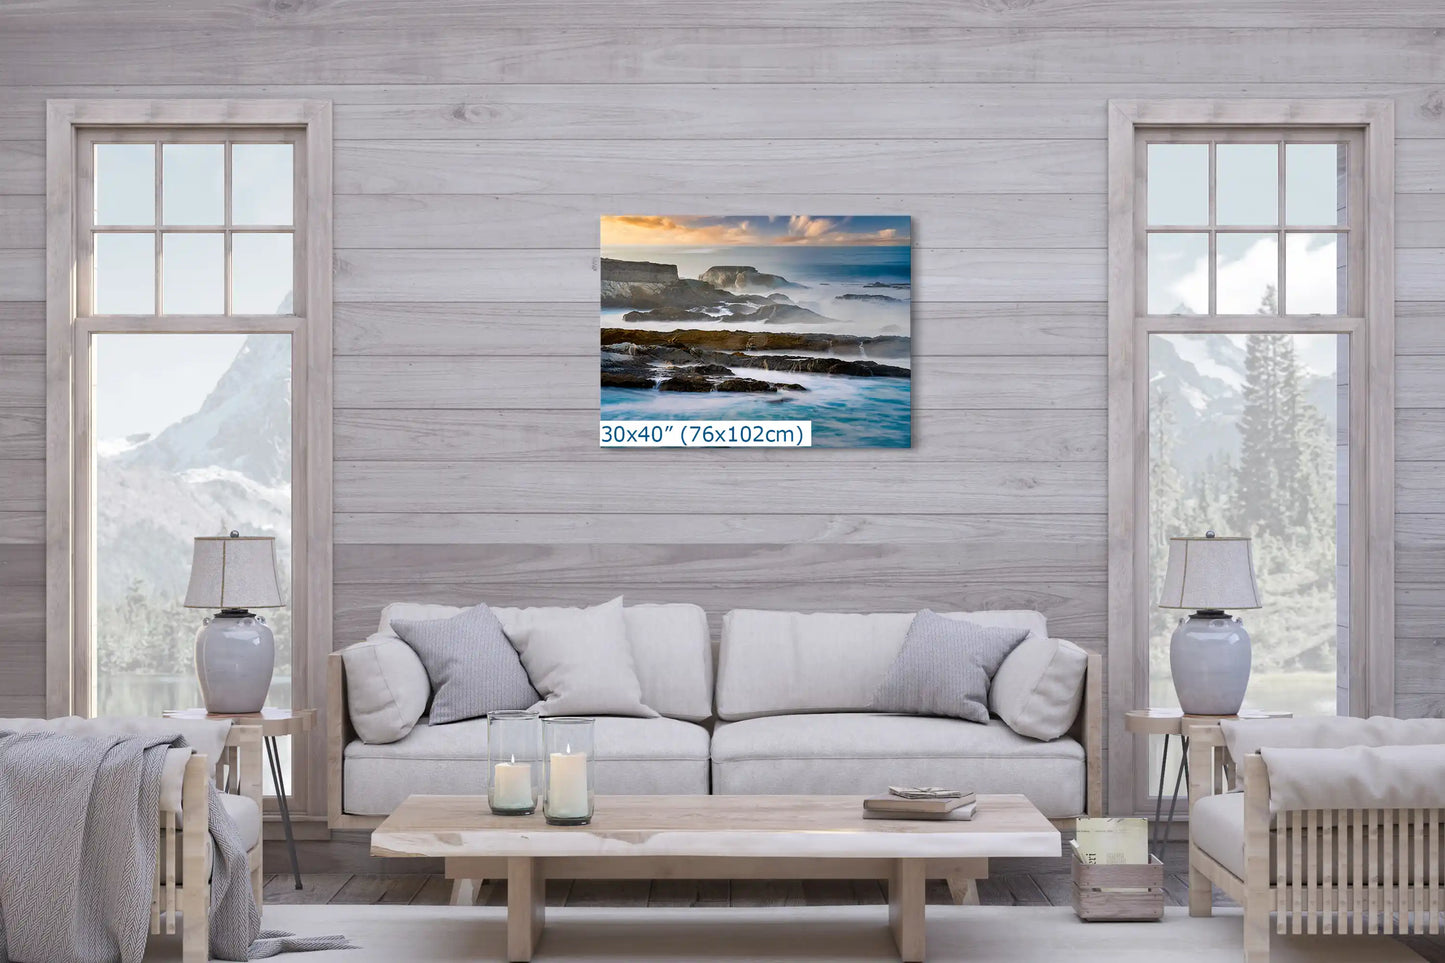 Large 30x40 inch wall art in a cozy living room setting, showcasing the expansive beauty of the California Pacific shoreline for an inviting feel.